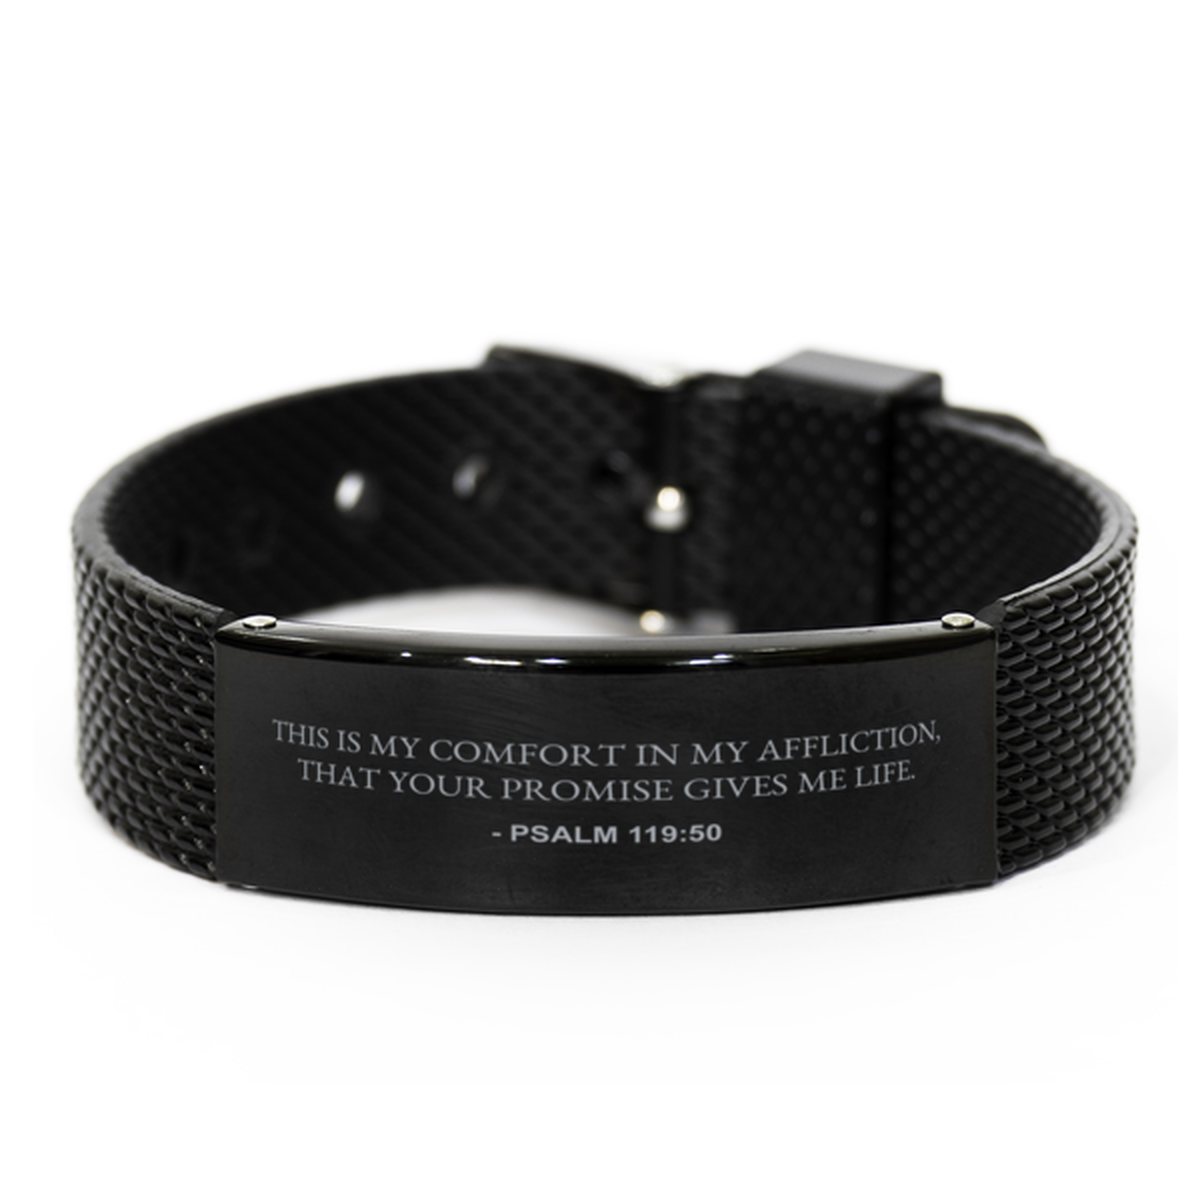 Christian Black Bracelet,, Psalm 119:50 This Is My Comfort In My Affliction, That Your, Motivational Bible Verse Gifts For Men Women